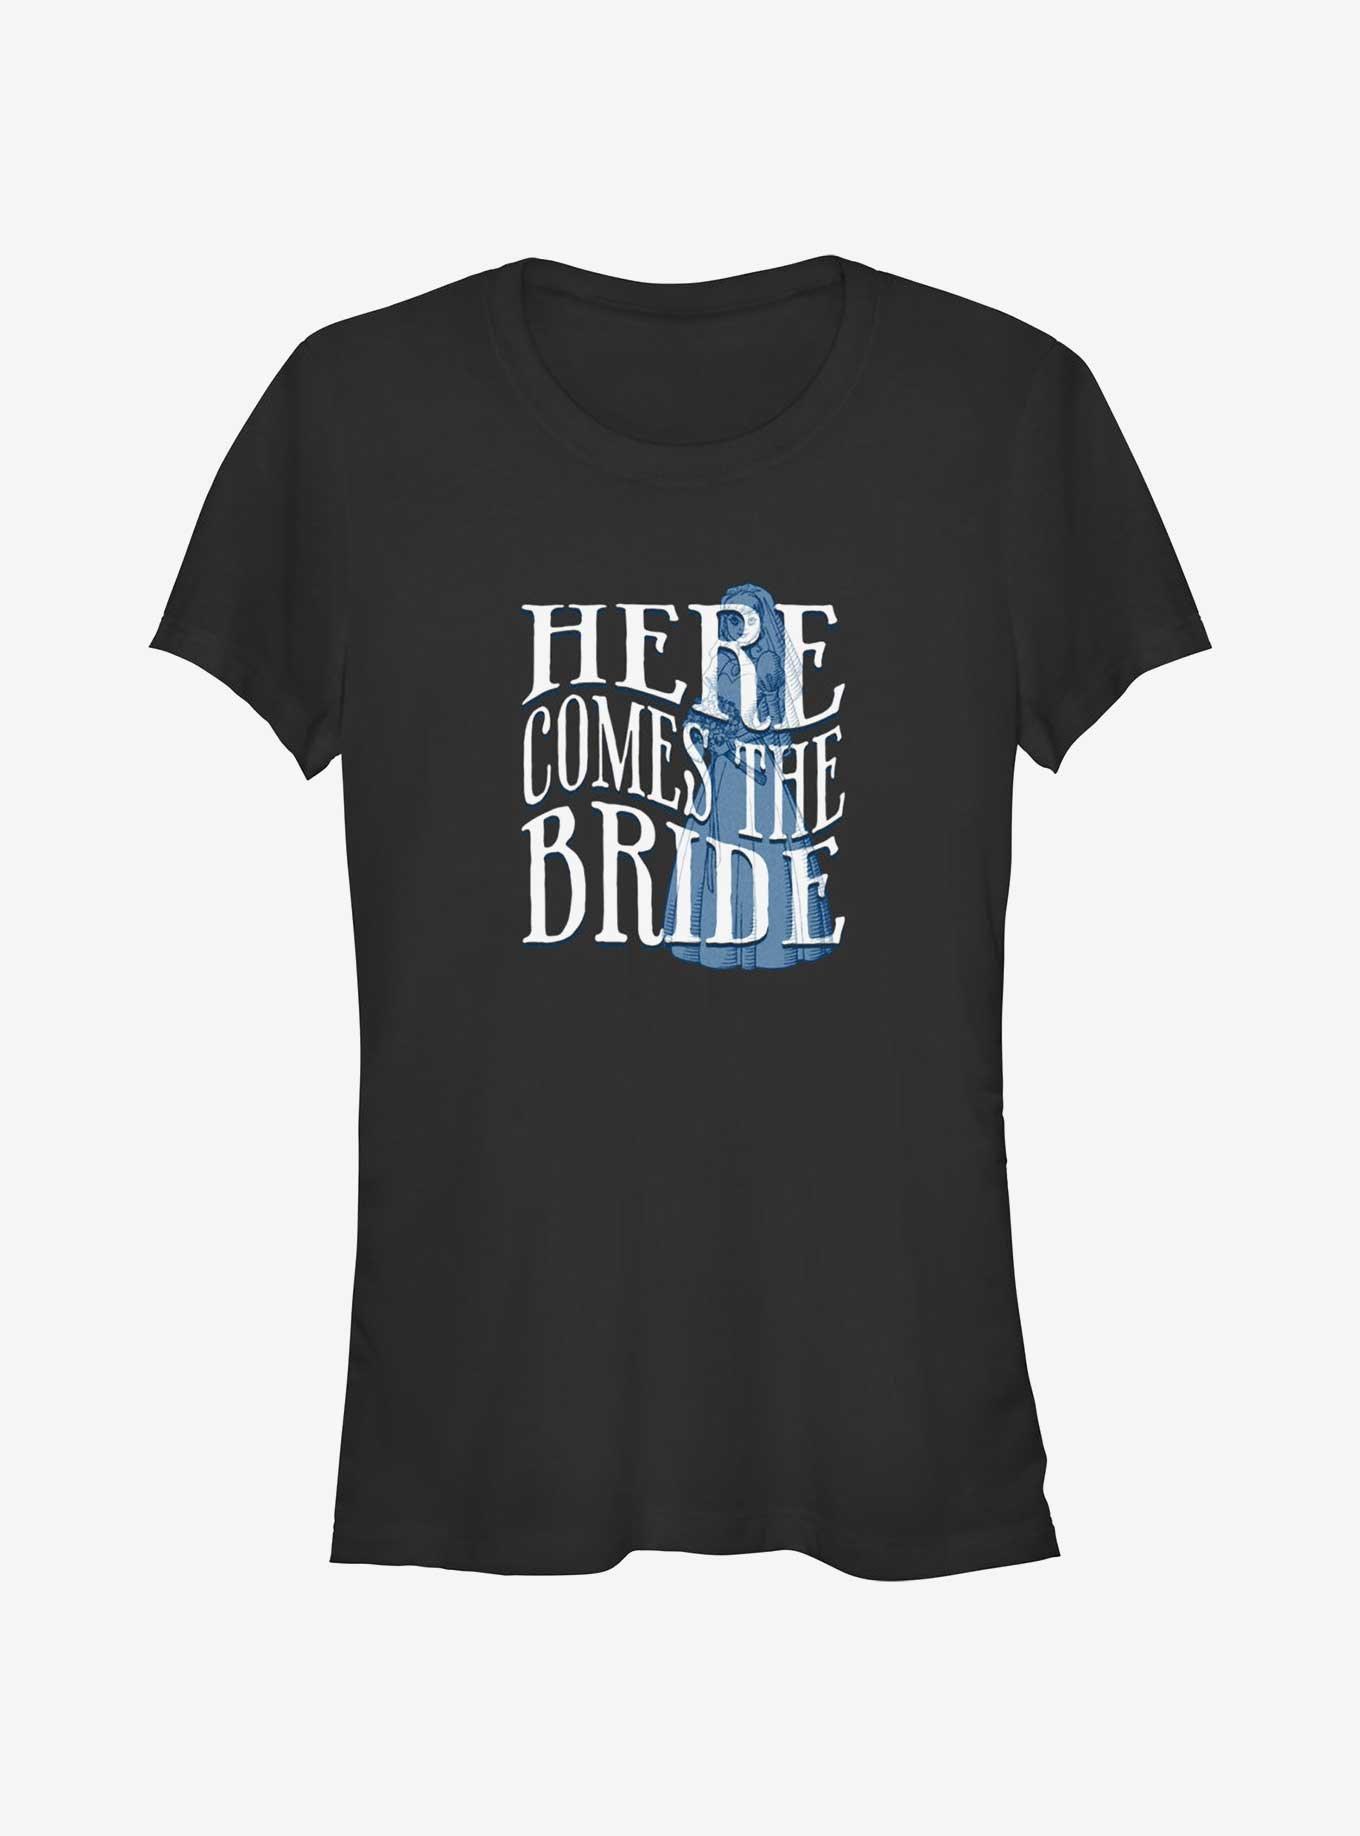 Disney Haunted Mansion Here Comes The Ghost Bride Girls T-Shirt, BLACK, hi-res